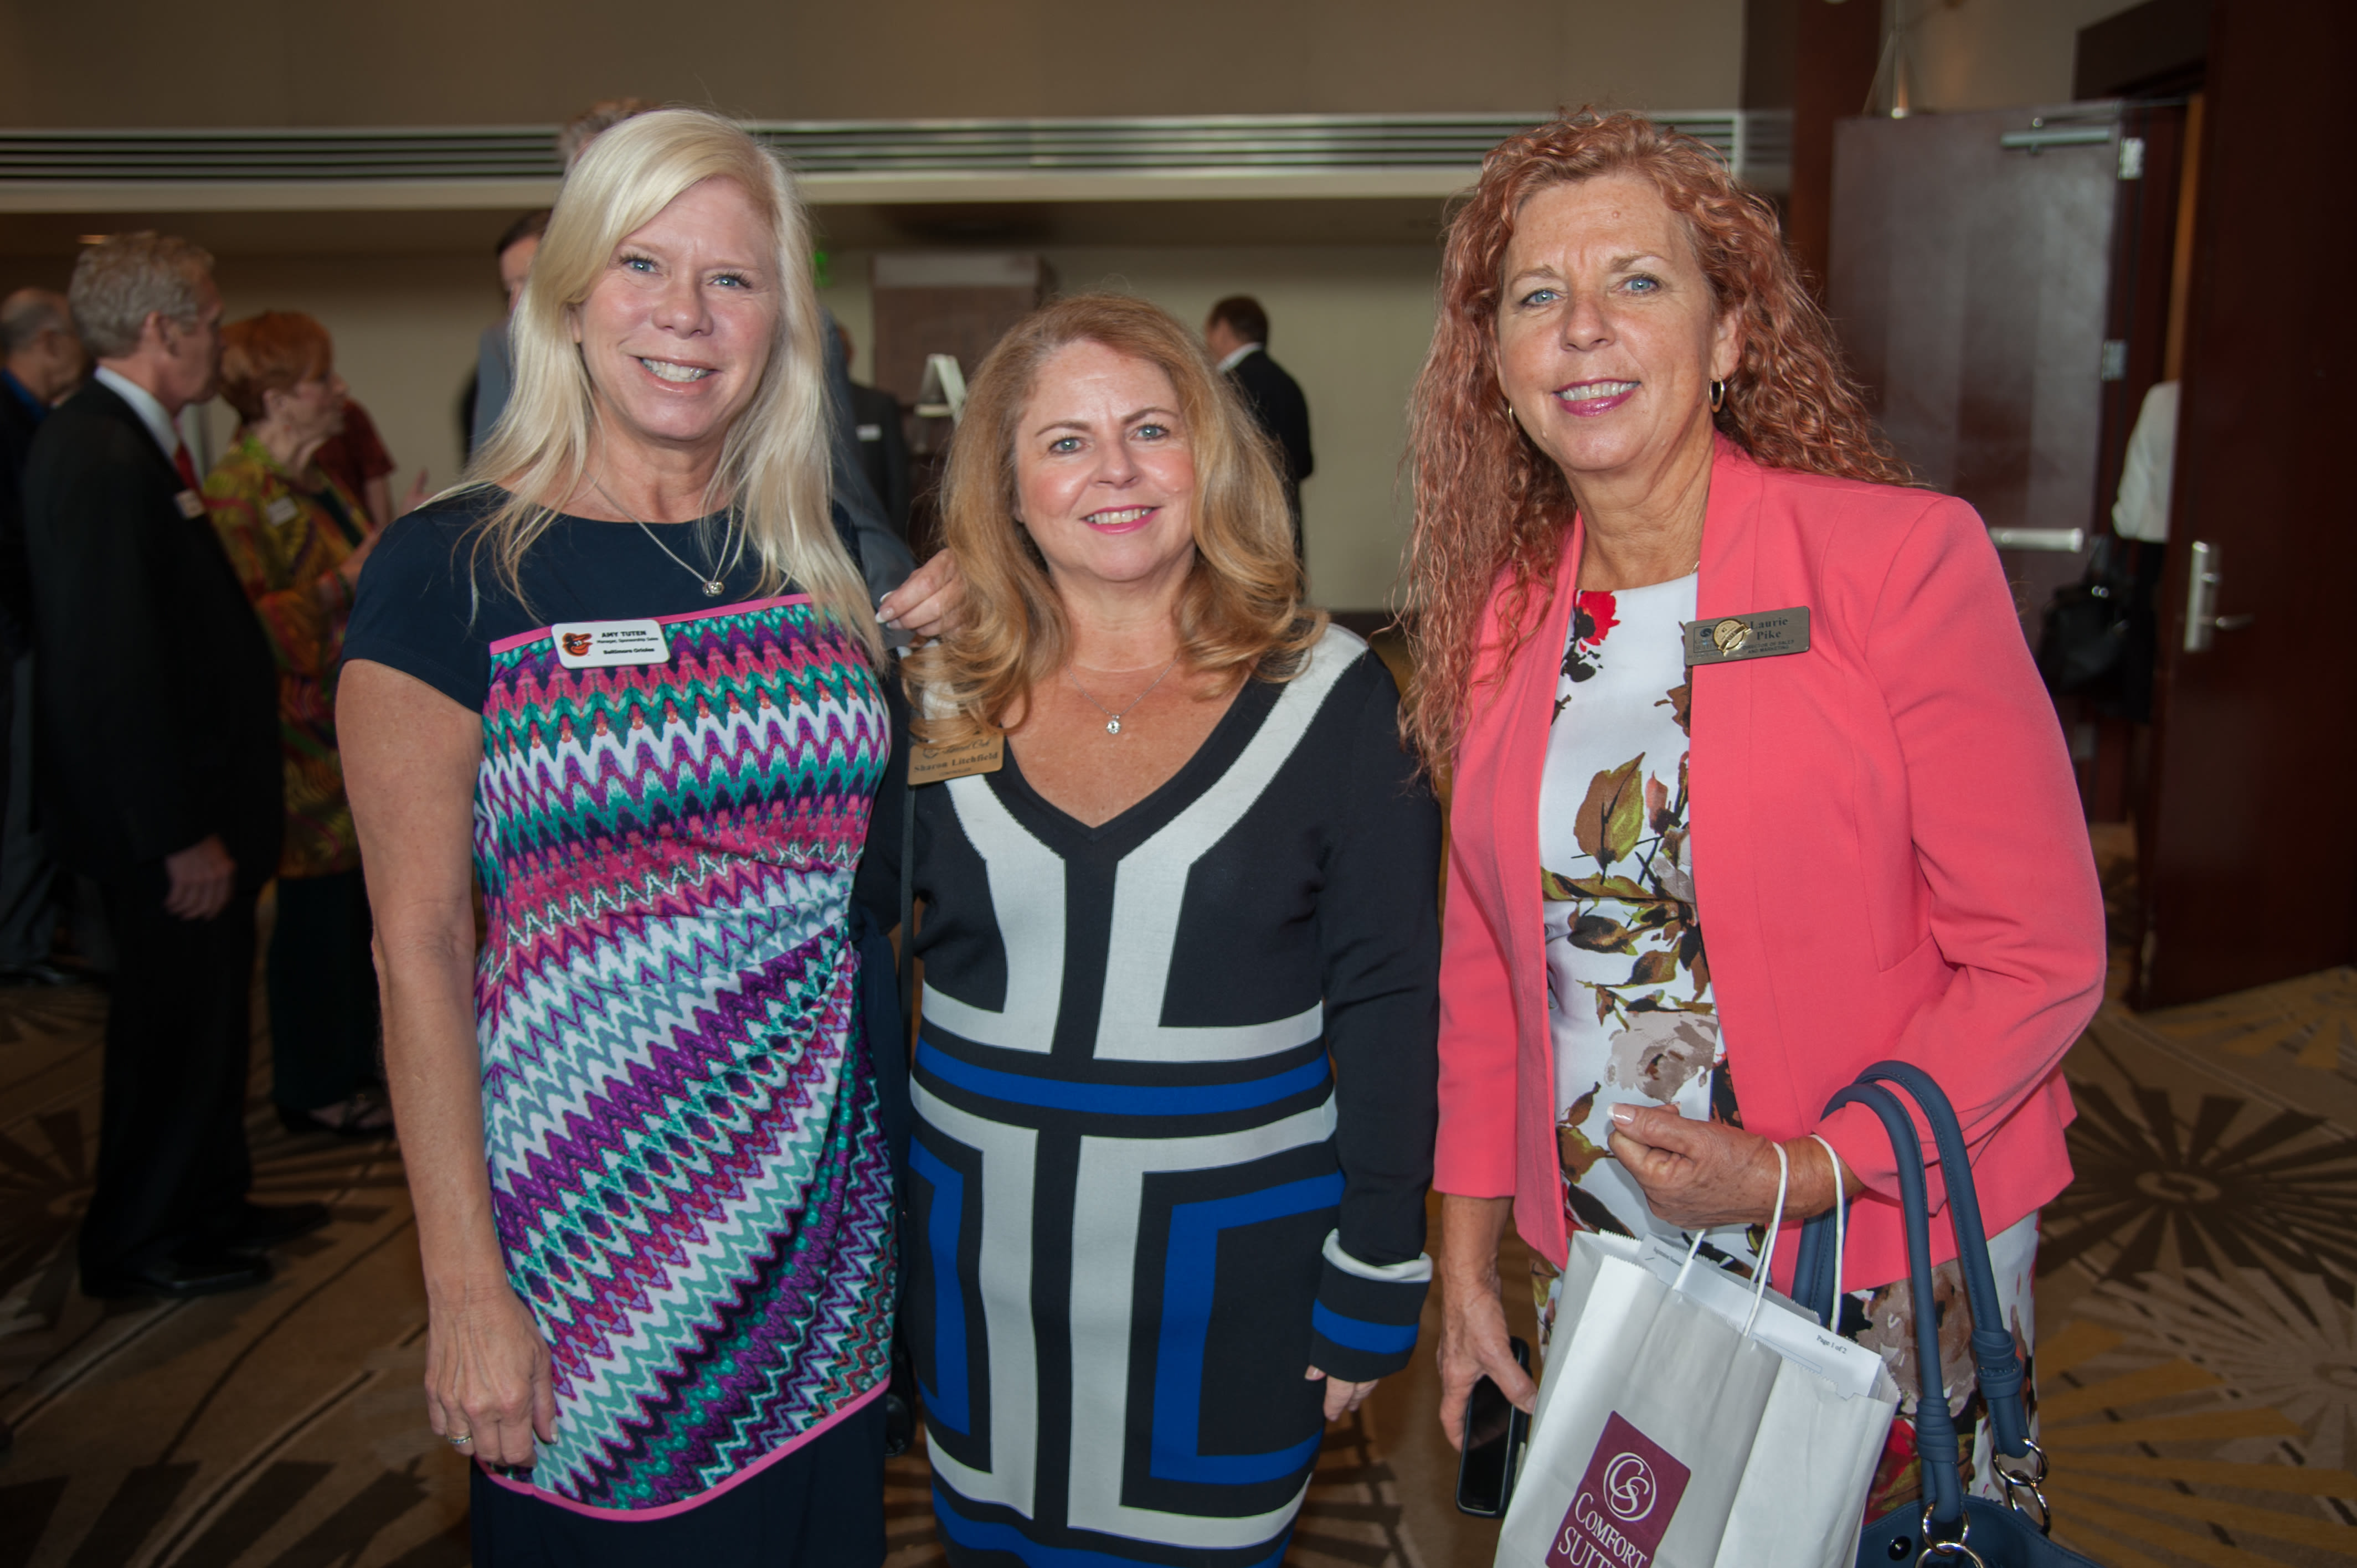 Photos From the Greater Sarasota Chamber of Commerce's Annual Meeting